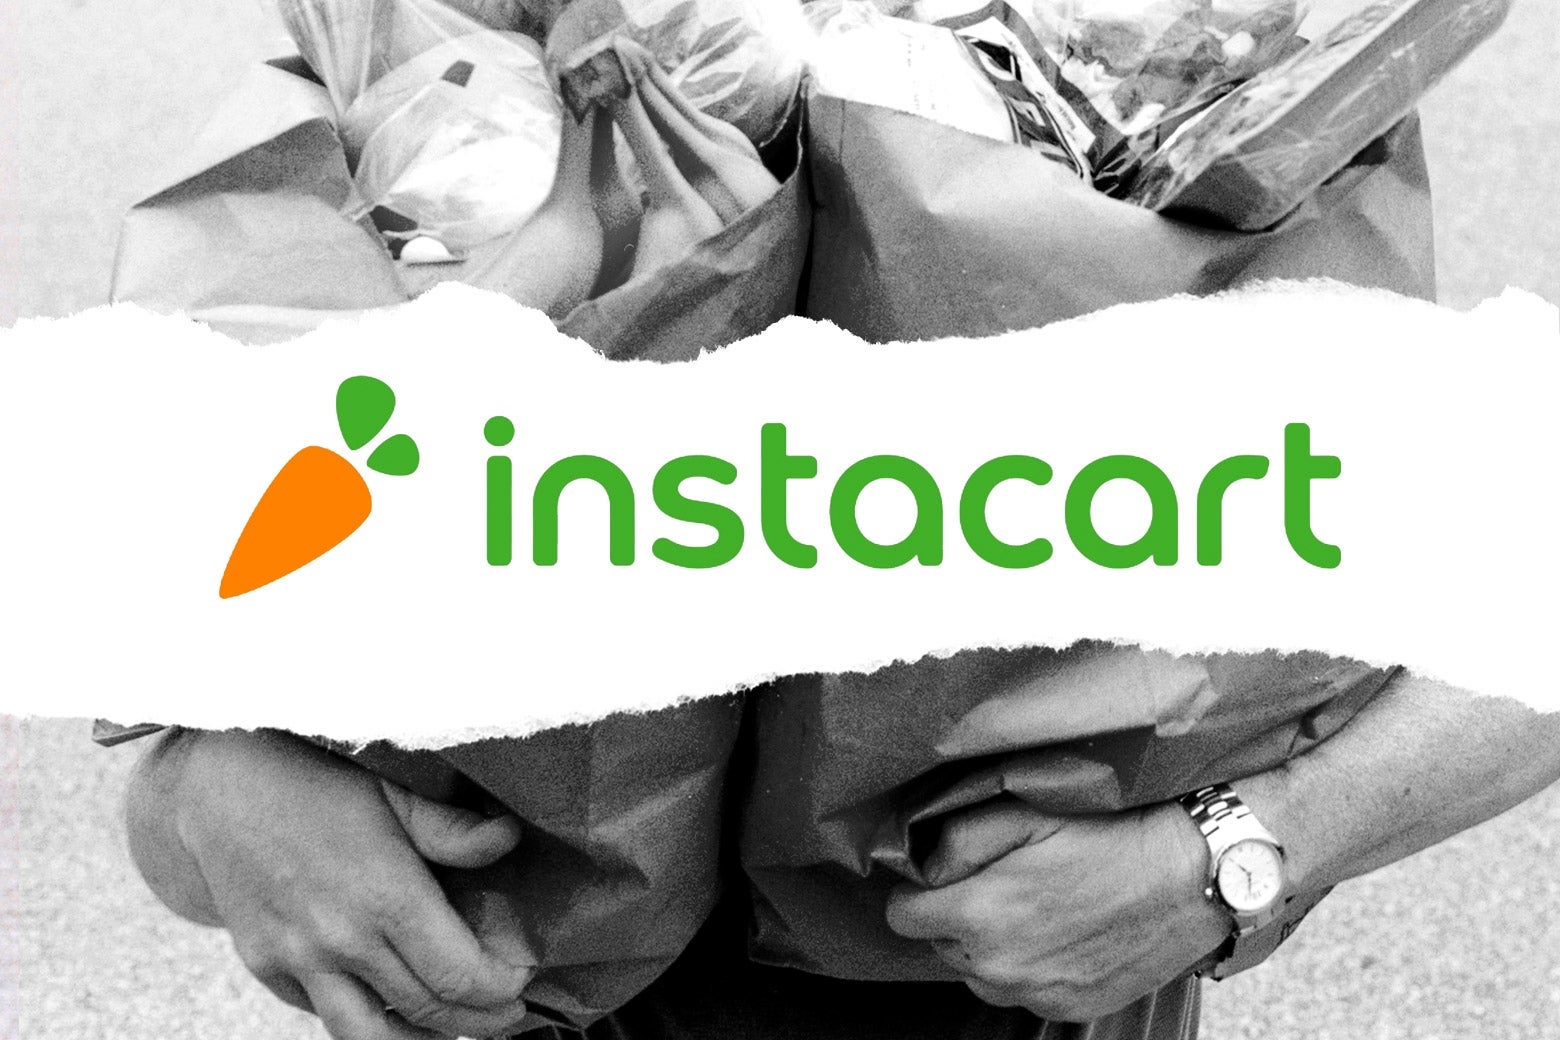 Instacart logo overlaid on a photo of a person holding bags of groceries.